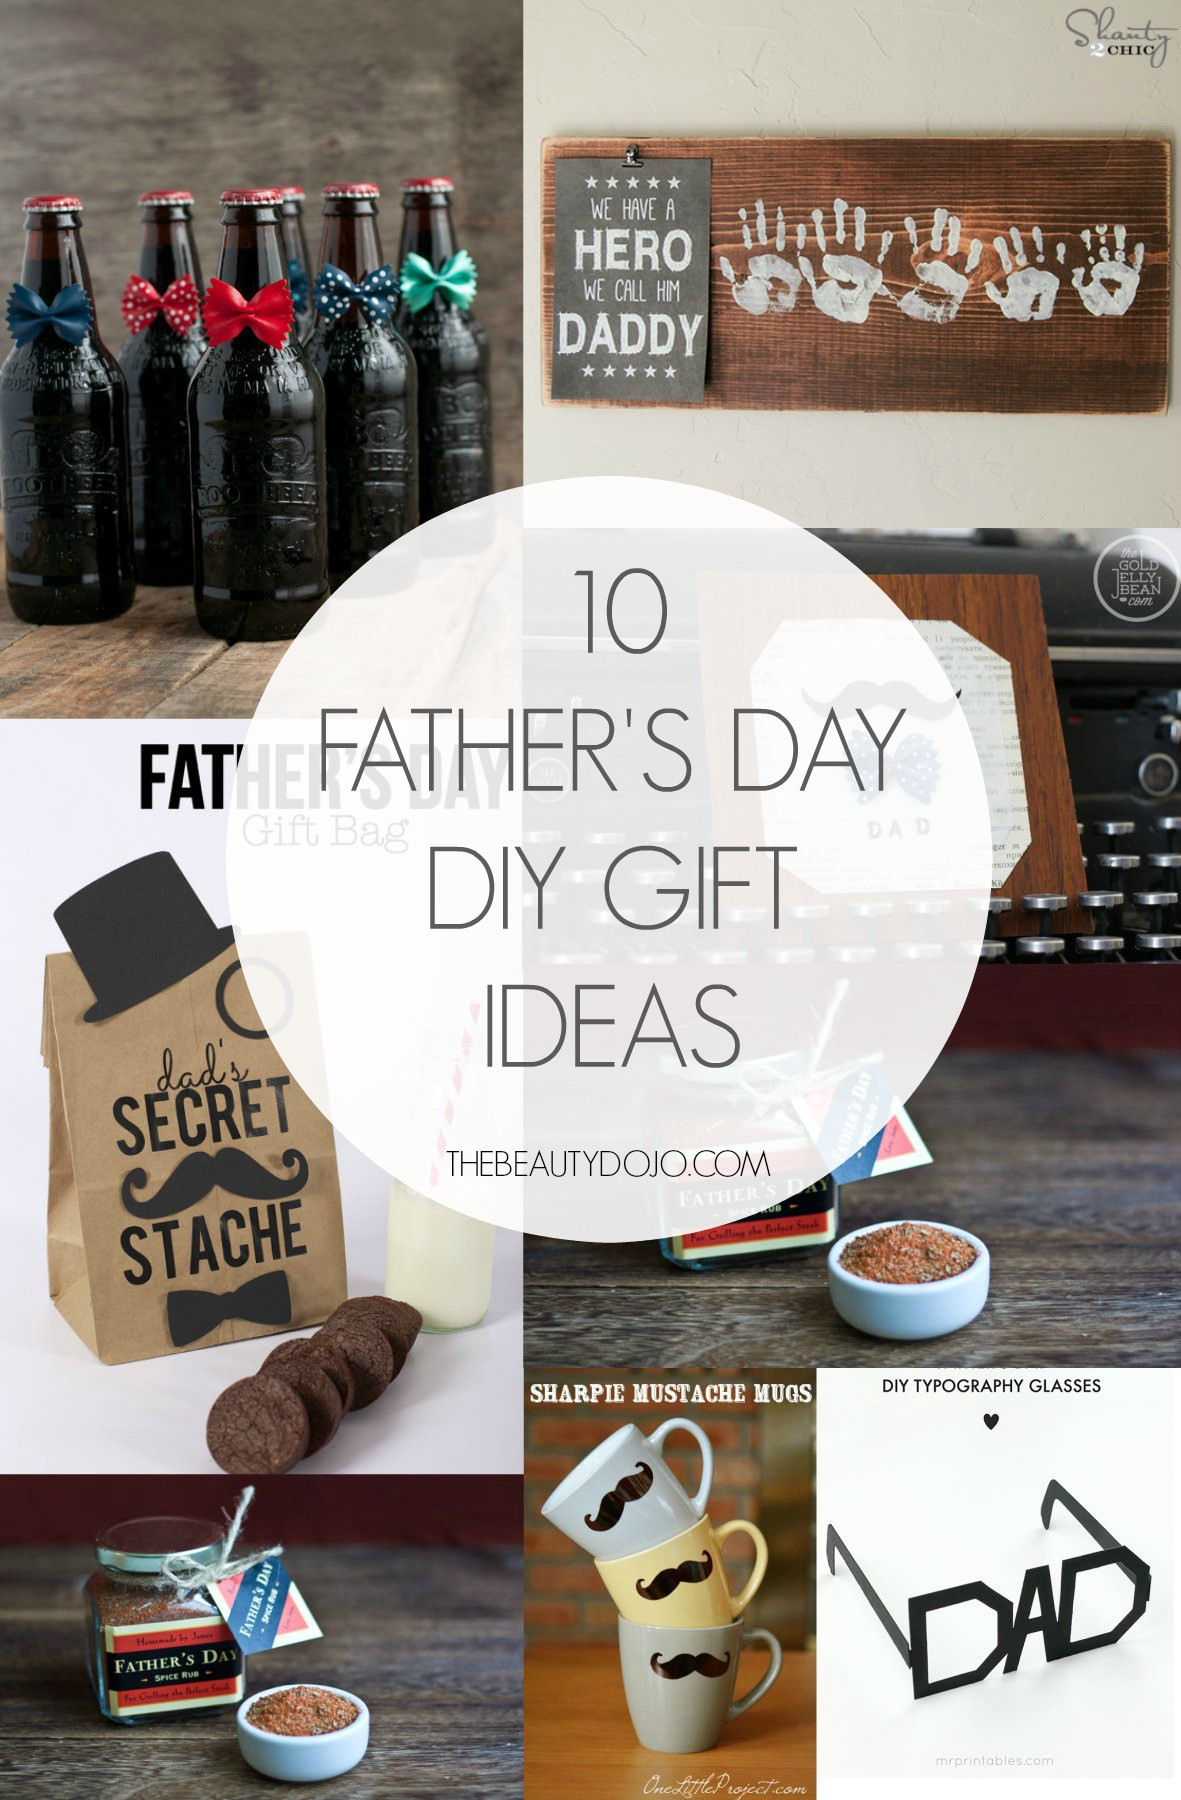 Fathers Day DIY Gifts
 10 Father s Day DIY Gift Ideas The Beautydojo